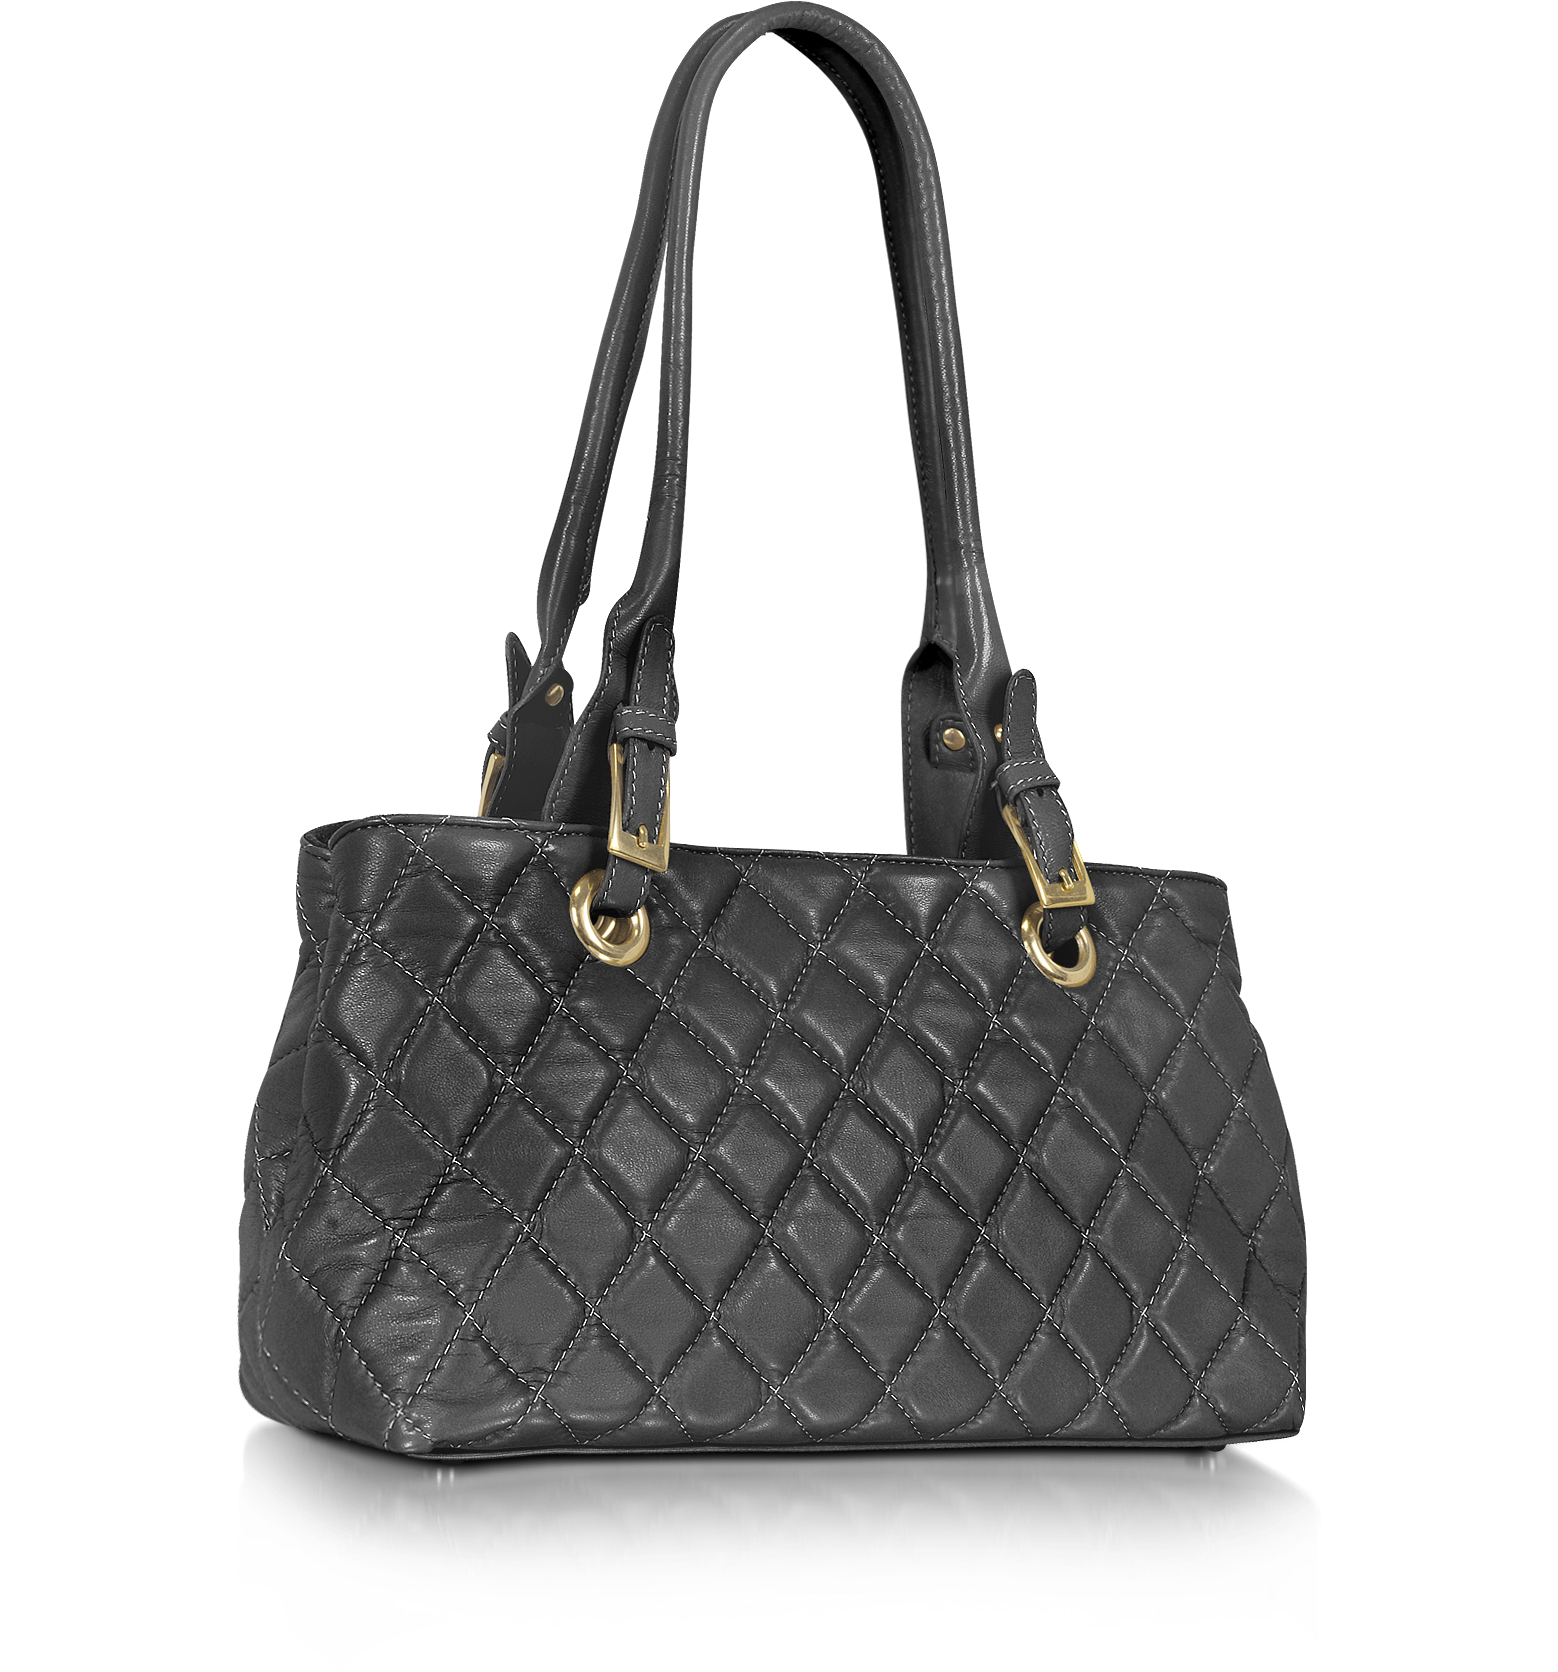 Fontanelli Black Quilted Leather Satchel Bag at FORZIERI